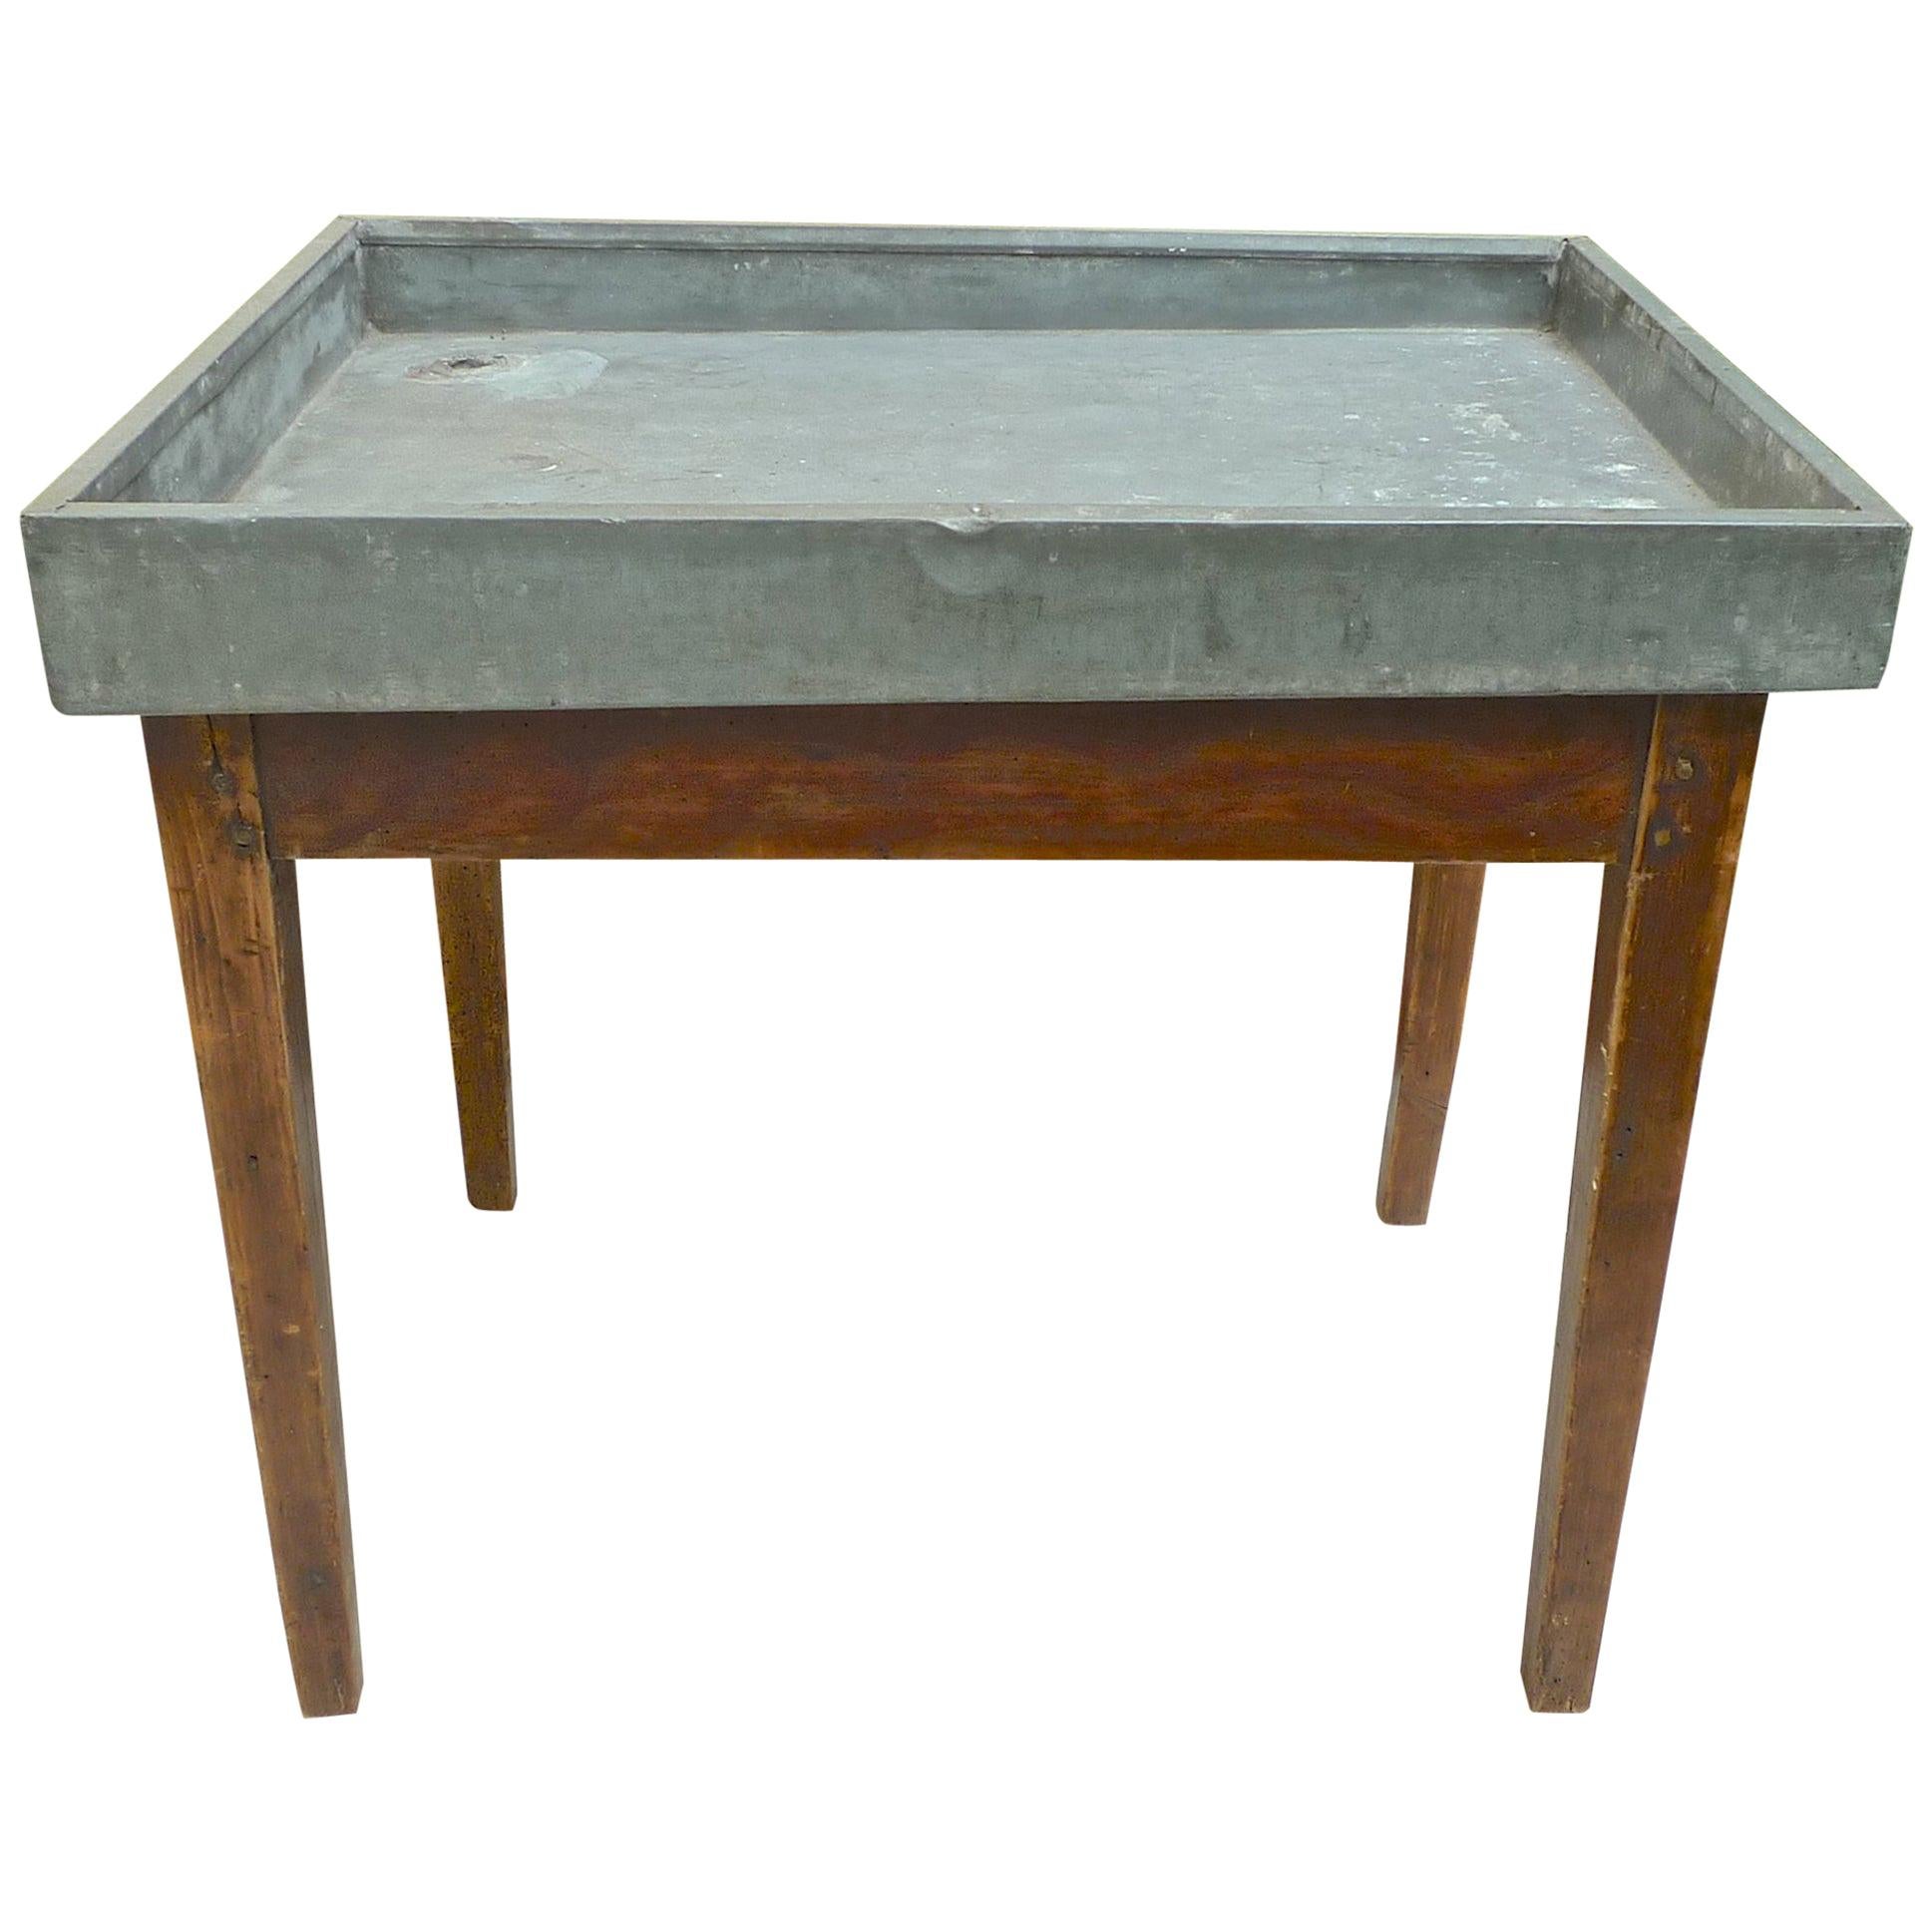 French 19th Century Zinc Top Flower Potting Table with One Corner Drainage Hole